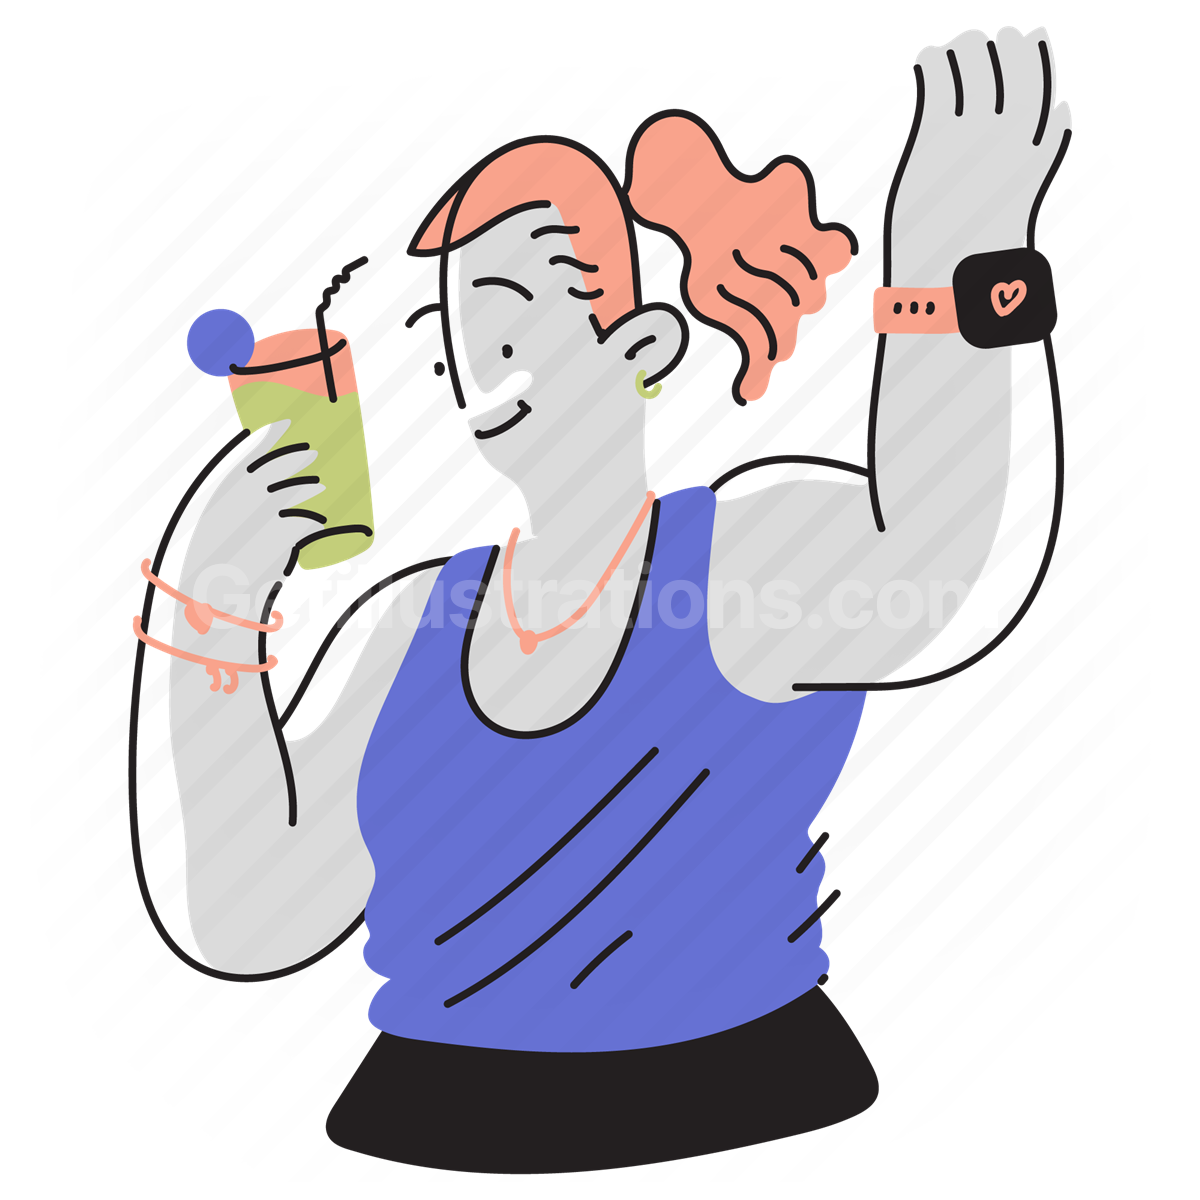 drink, beverage, smartwatch, watch, device, electronic, woman